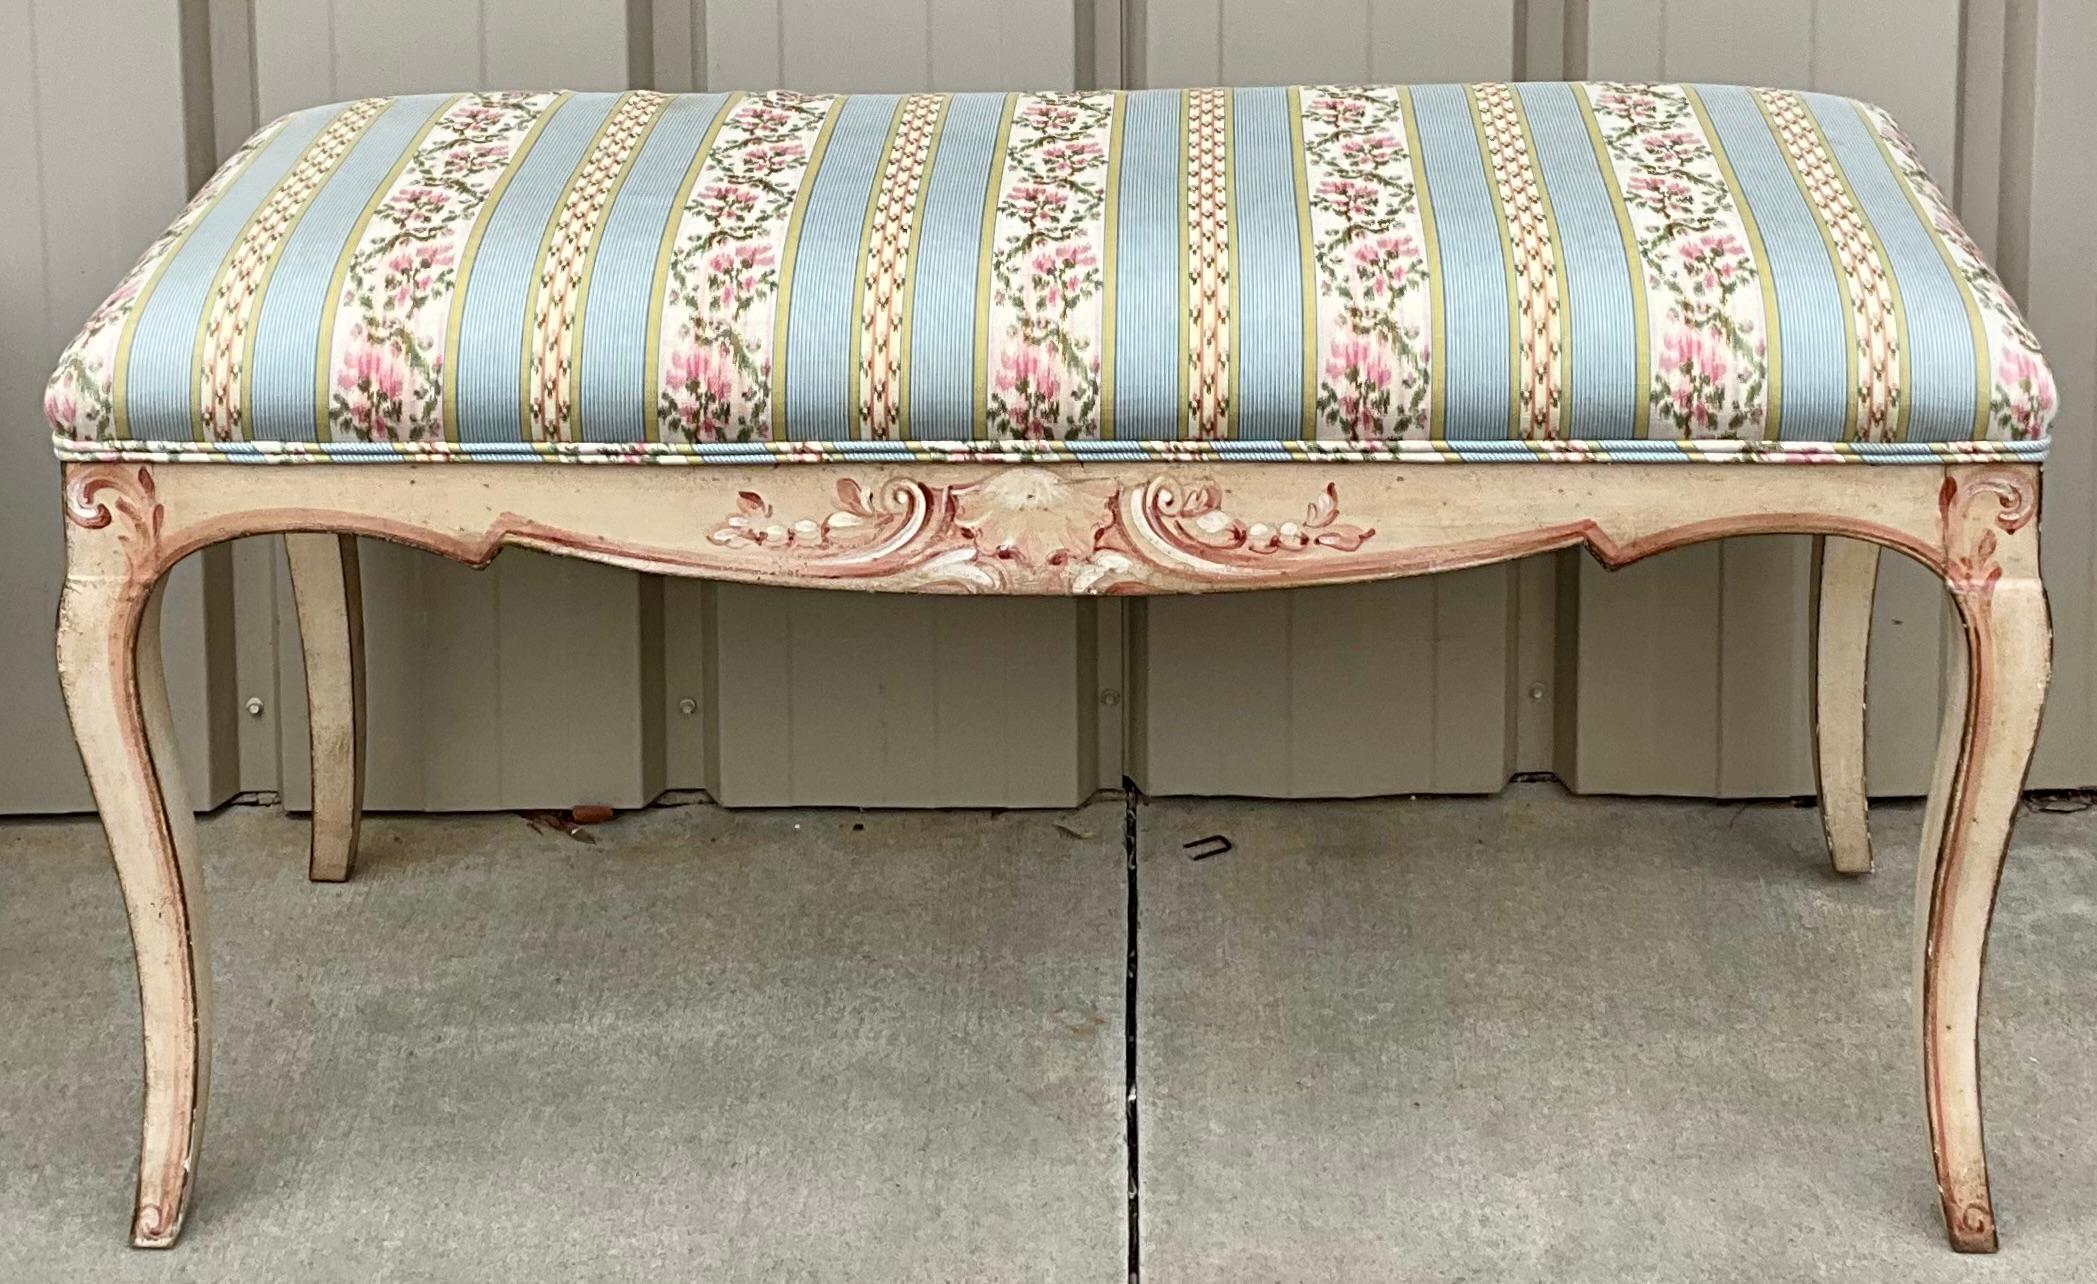 1960s Carved And Painted Italian Bench / Ottoman In Striped Floral Chintz  For Sale 4